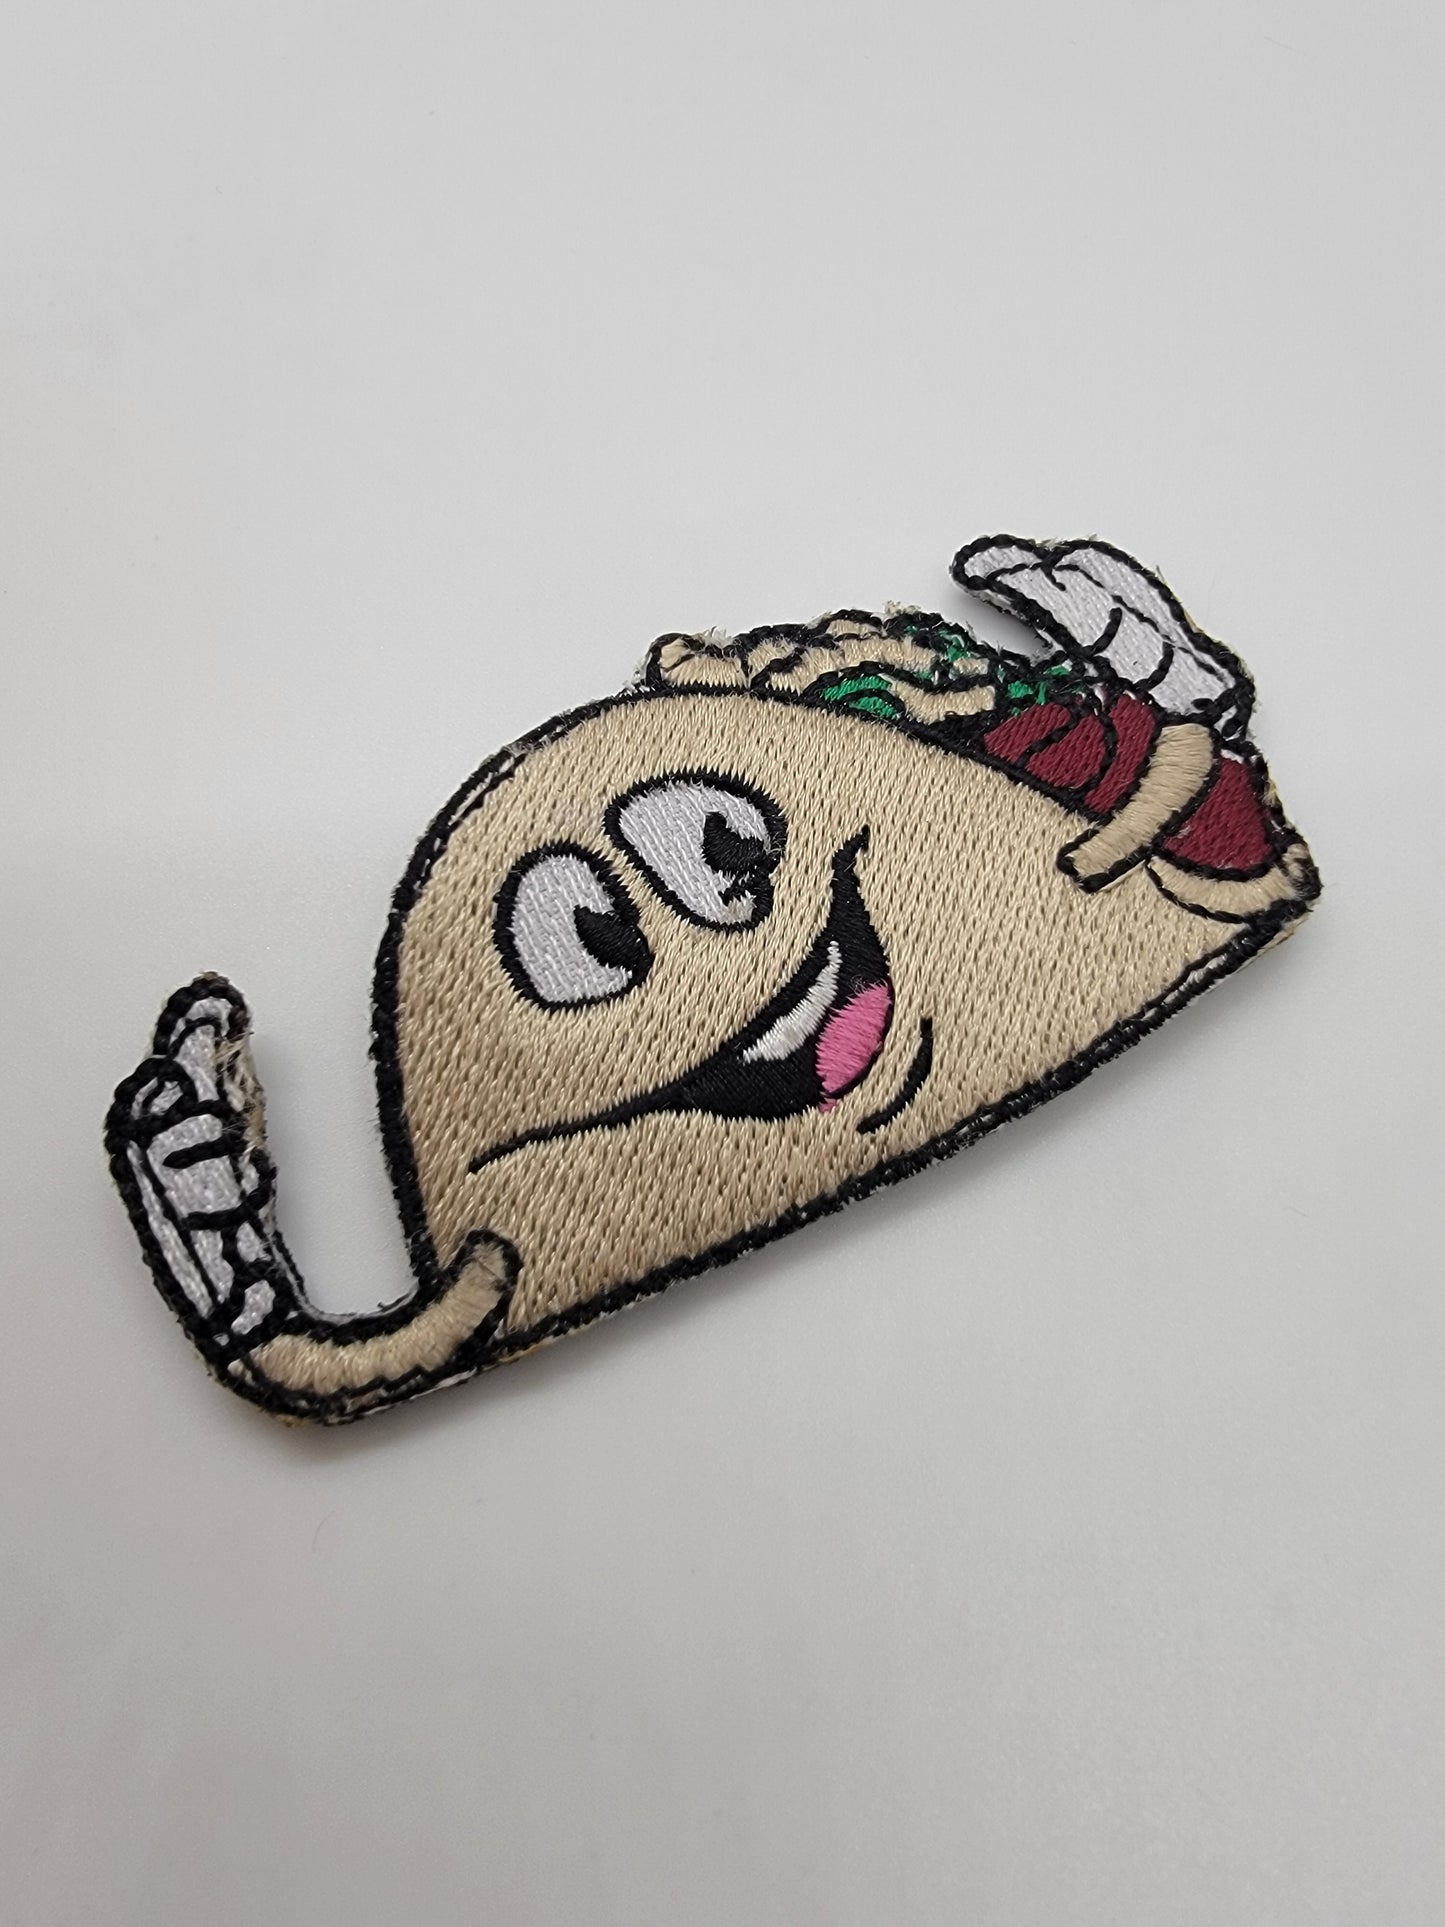 Embroidery "Taco dude" velcro backed patch